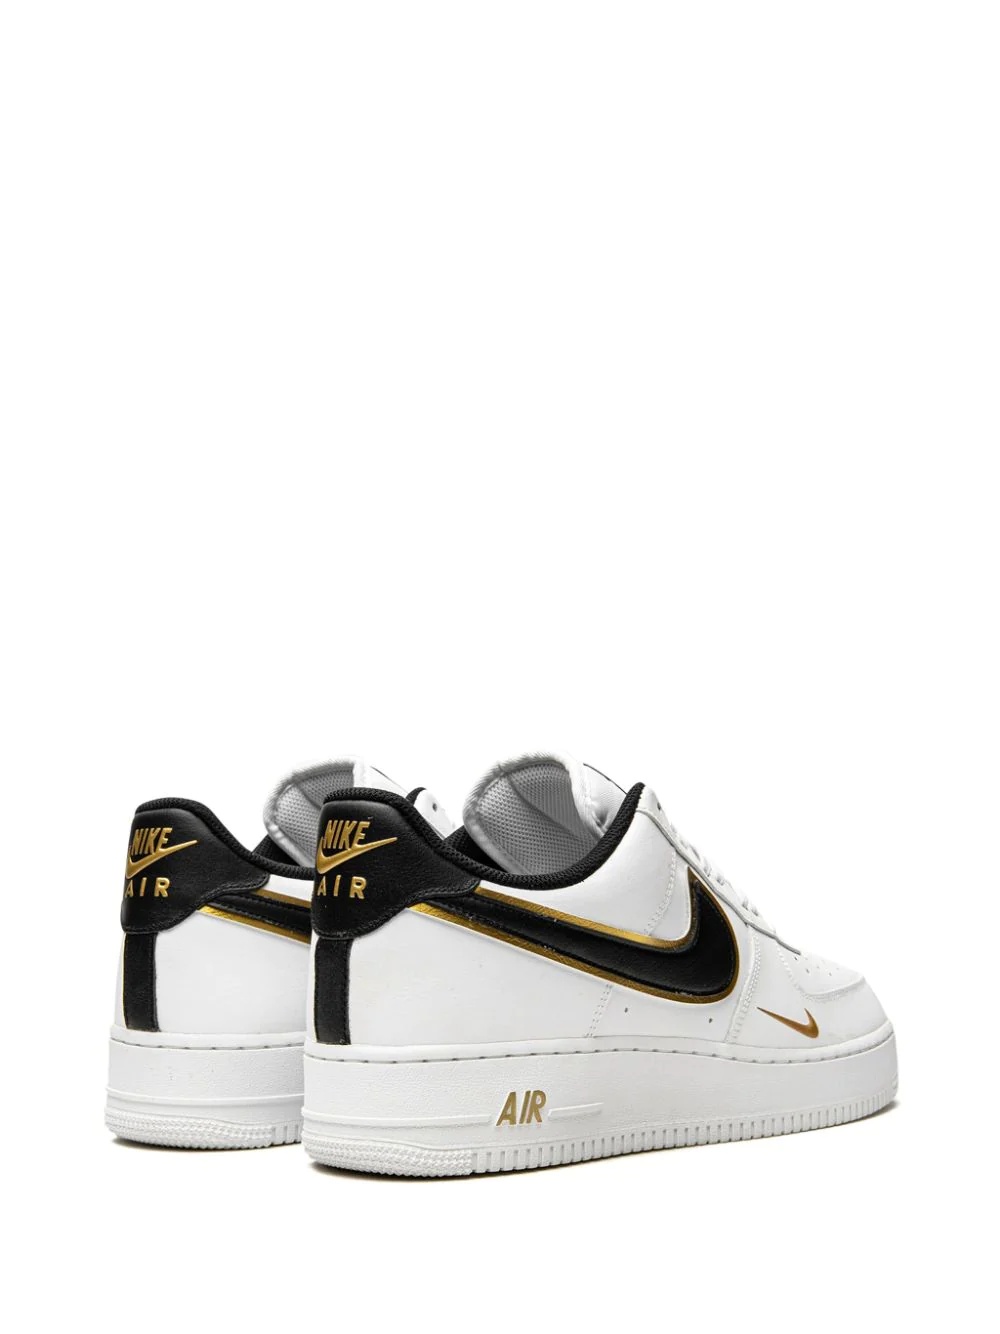 Air Force 1 '07 LV8 ''Double Swoosh - White/Black/Gold'' sneakers - 3